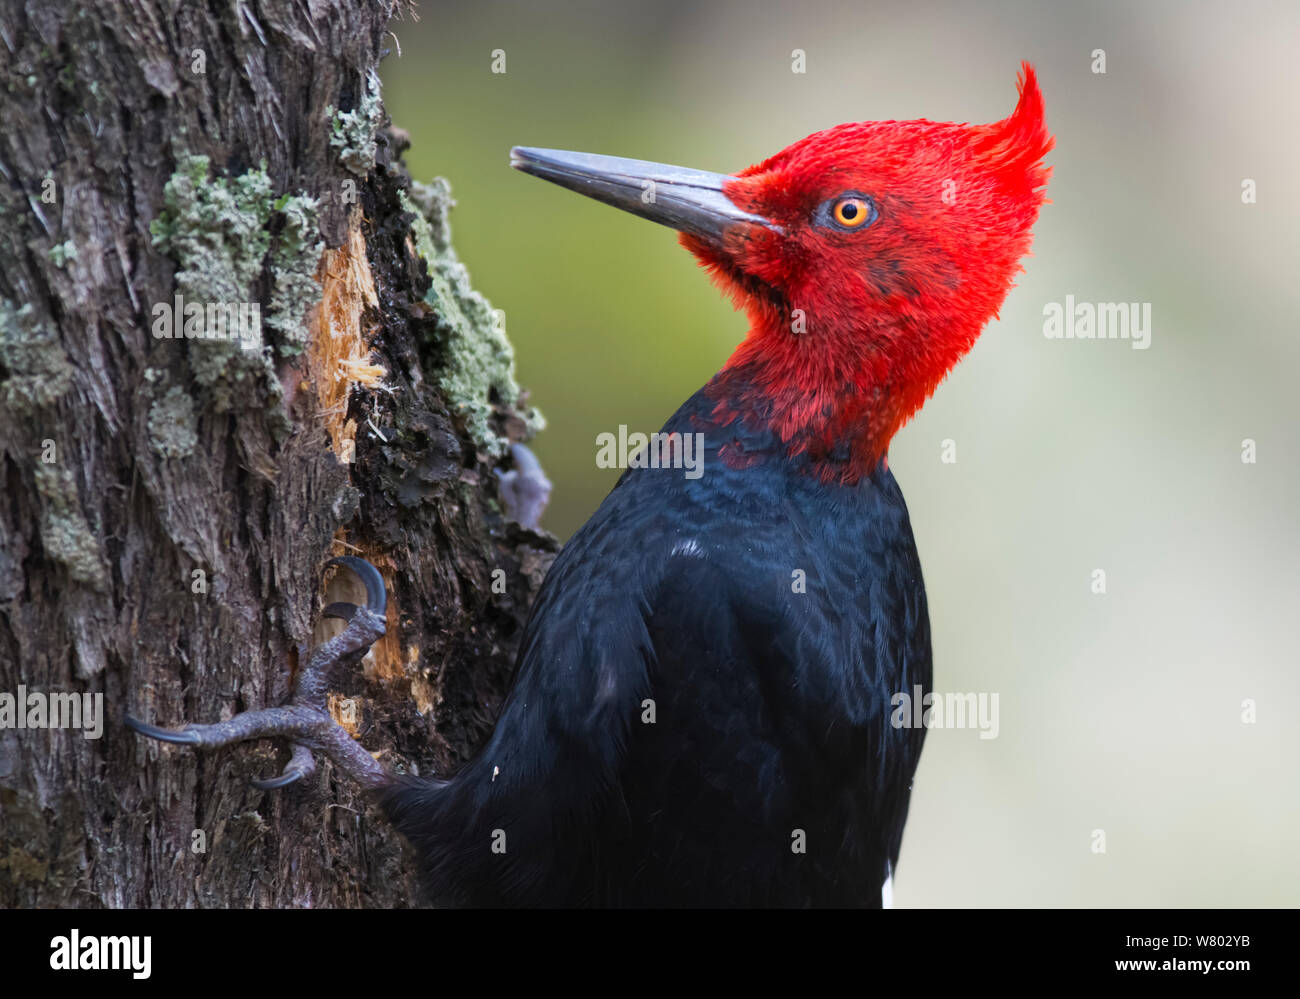 Magellanic woodpecker (Campephilus magellanicus) pecking at tree trunk, Torres del Paine National Park, Chile Stock Photo